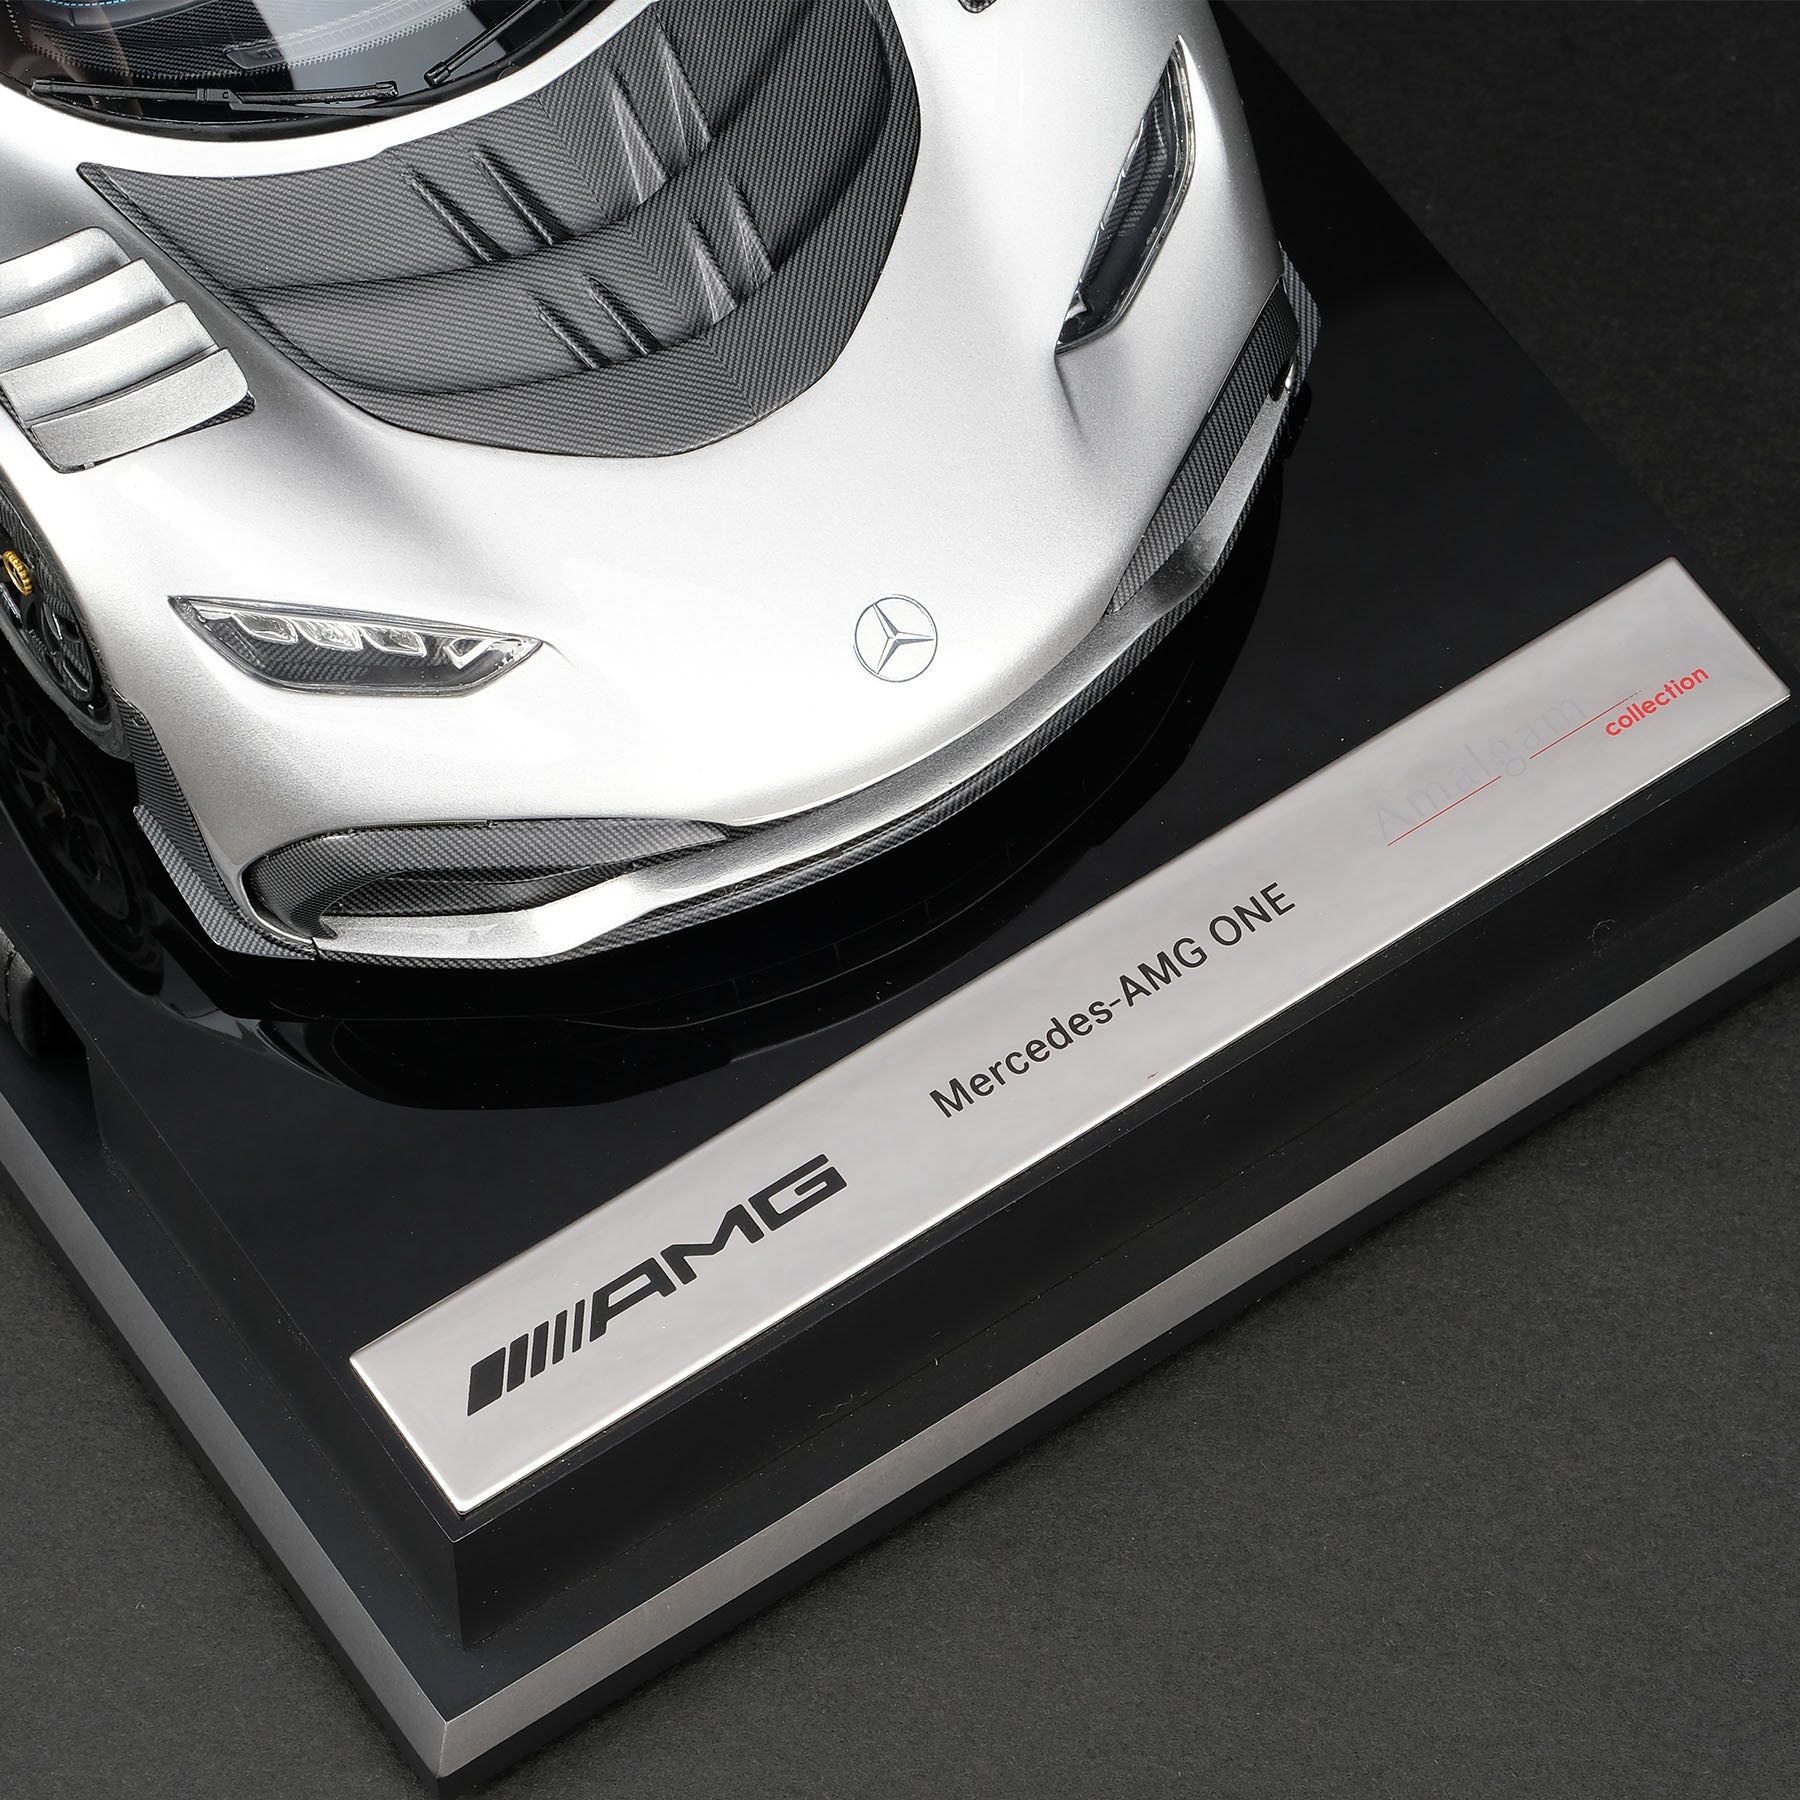 Mercedes-AMG ONE at 1:18 scale